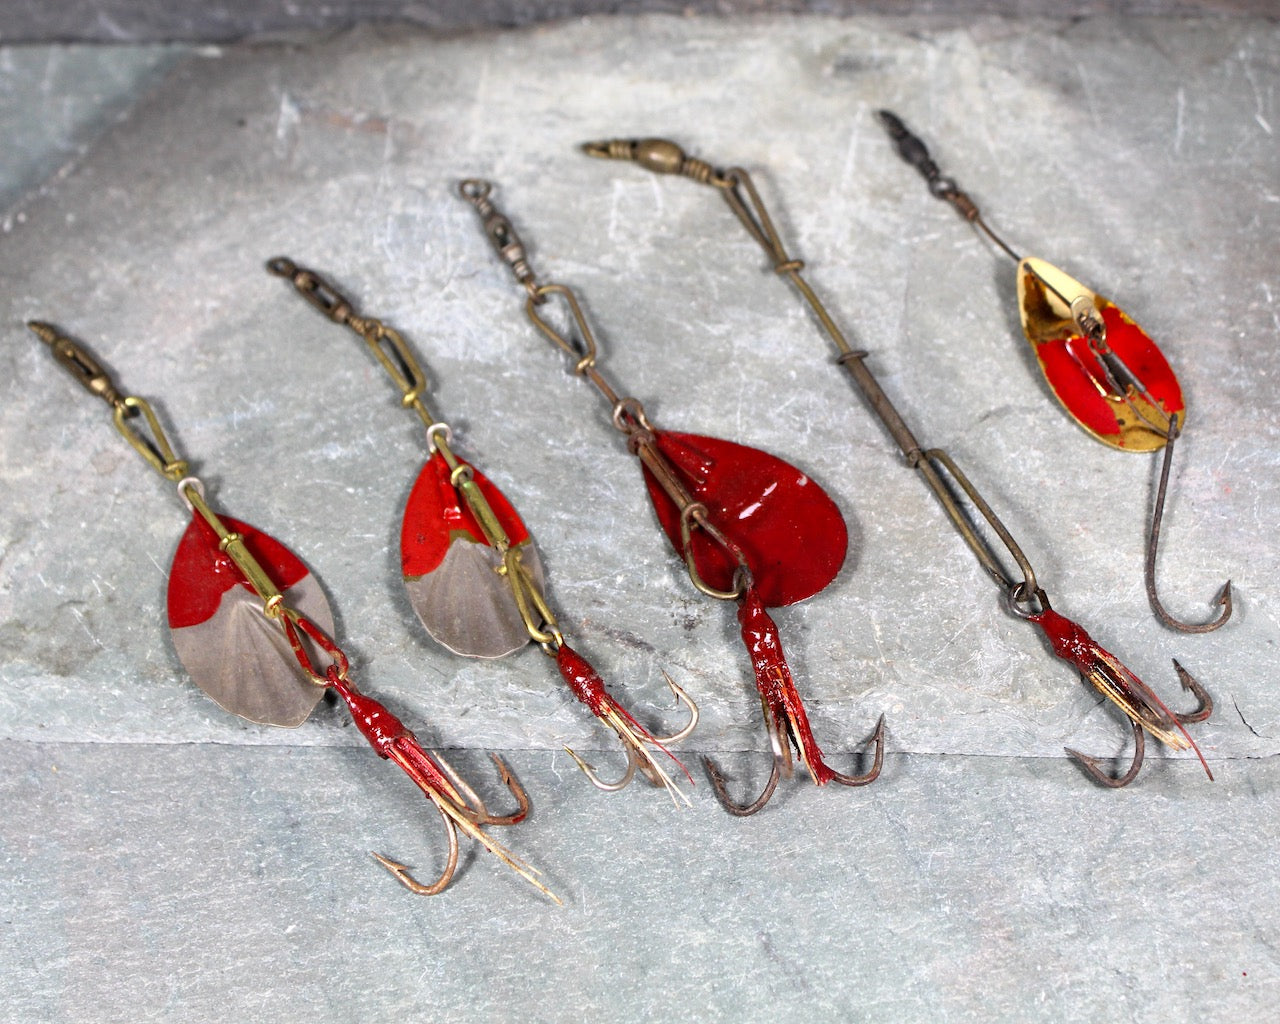 Fishing lure keychains  Fish jewelry, Fishing lures, Fish crafts